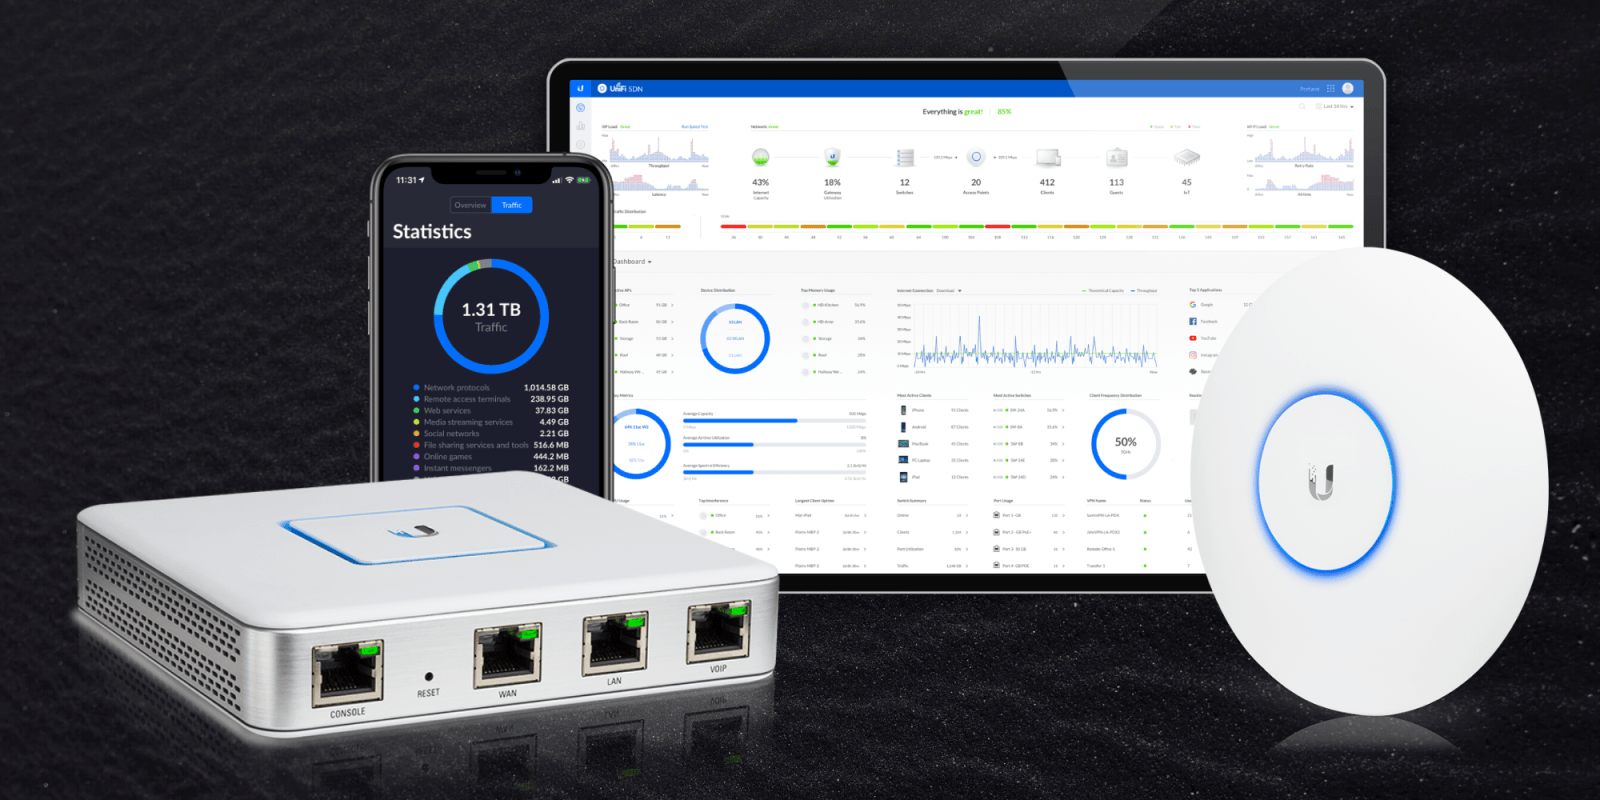 UniFi Getting Started with Ubiquiti's line of prosumer gear - 9to5Toys